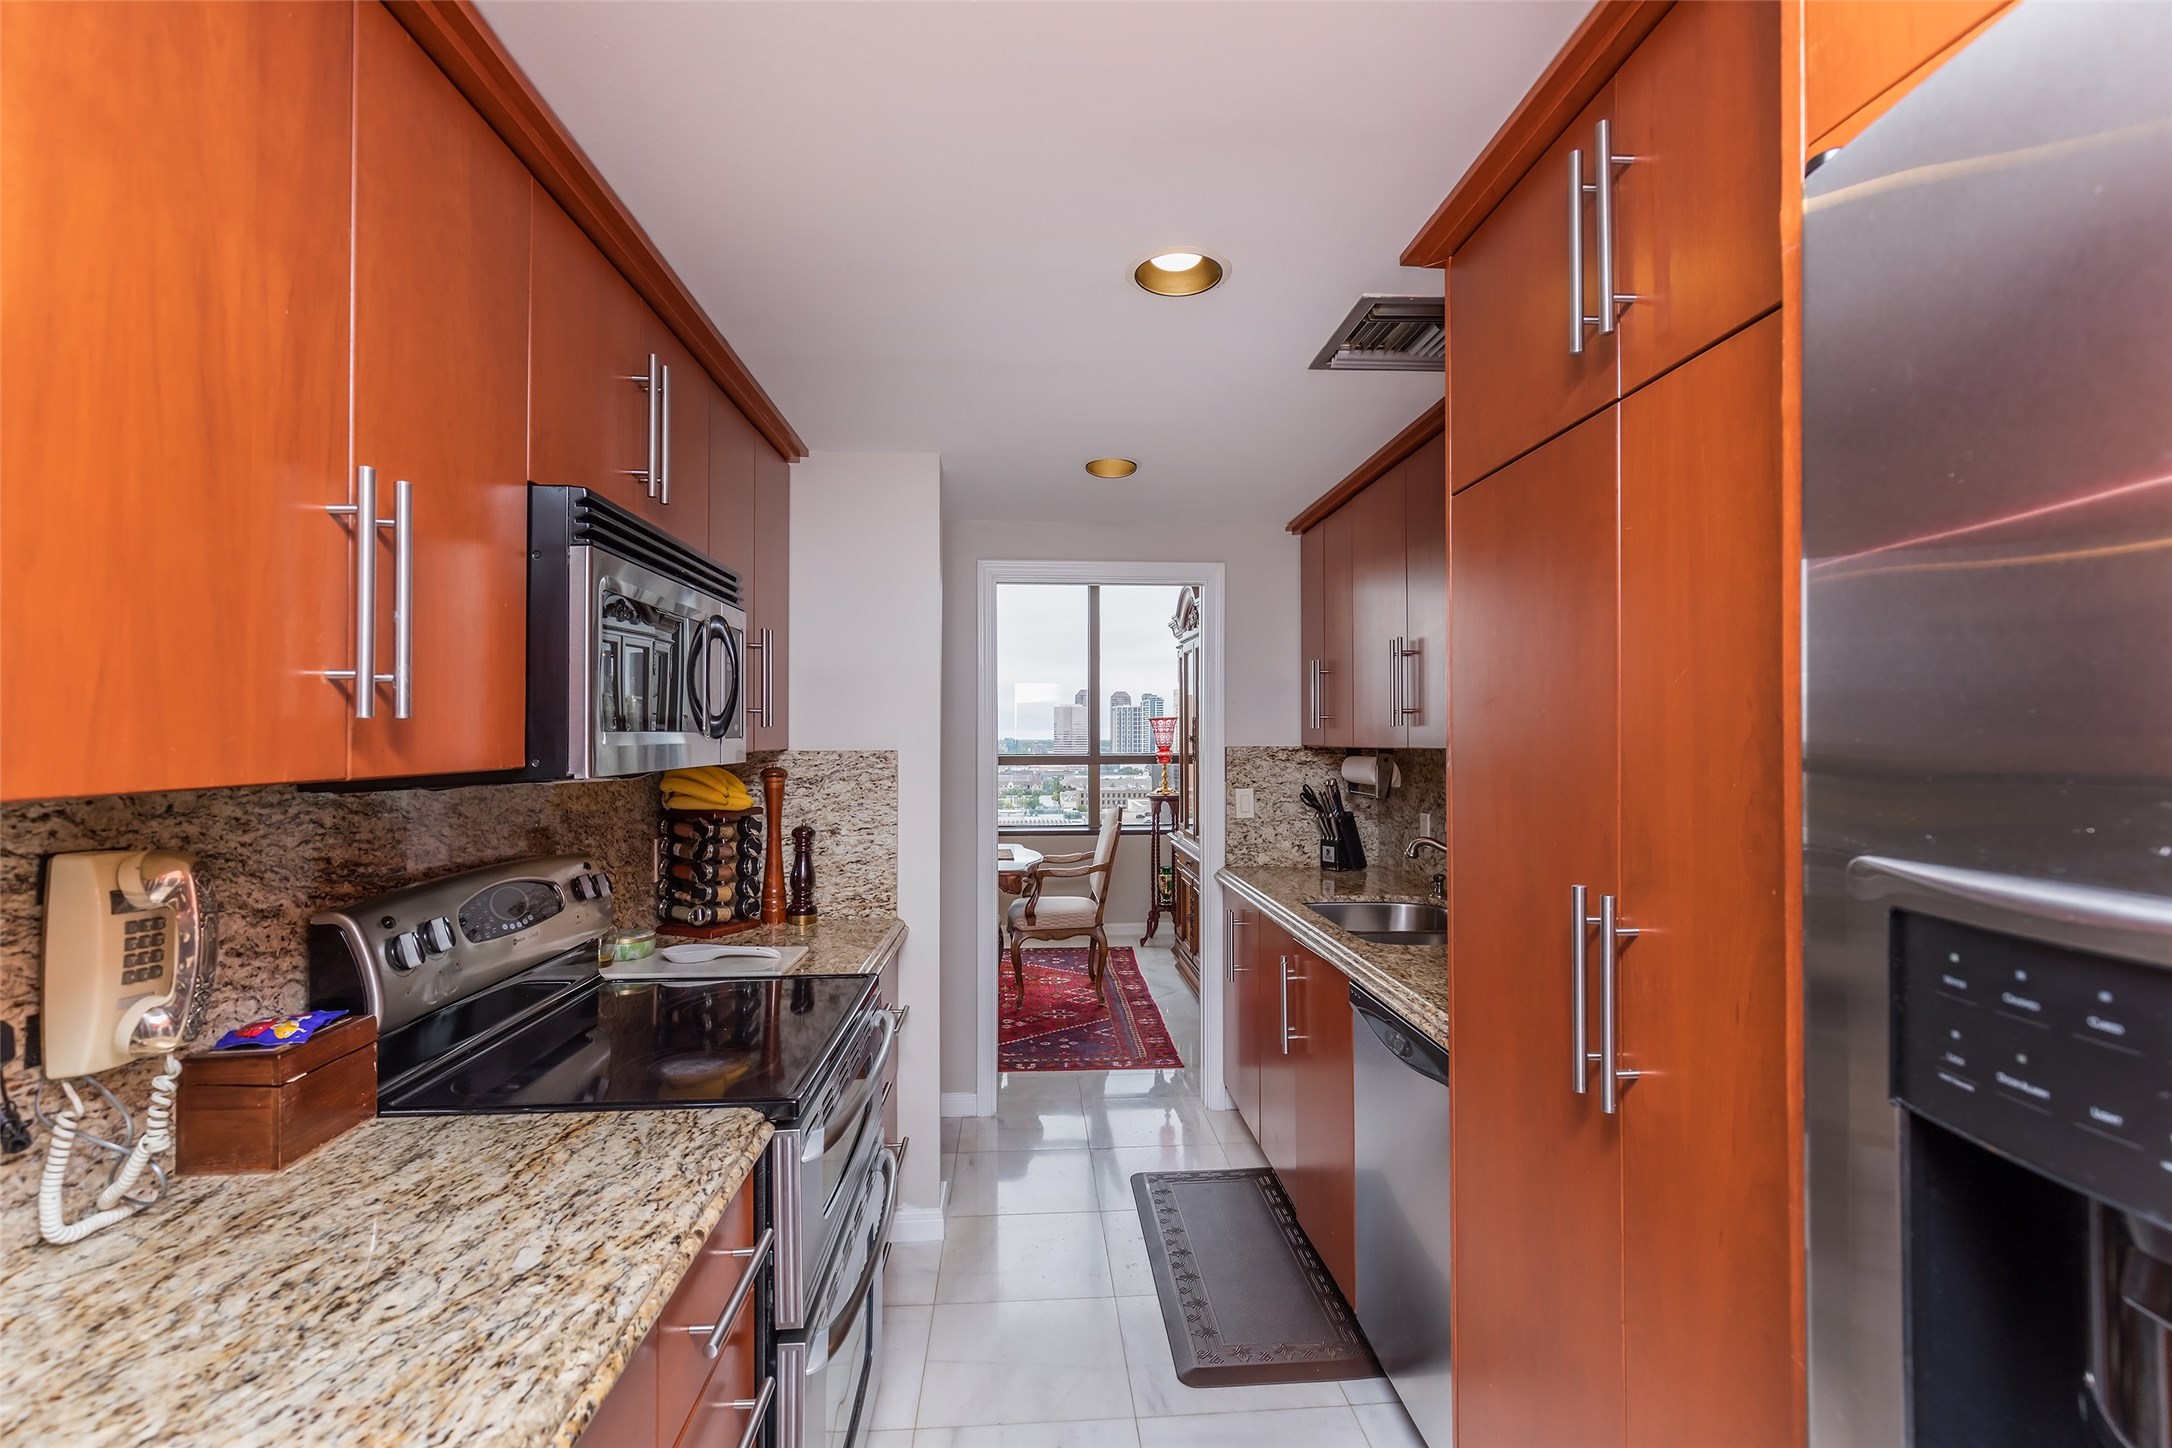 Updated kitchen with stainless steel appliances, immediately adjacent to dining area.